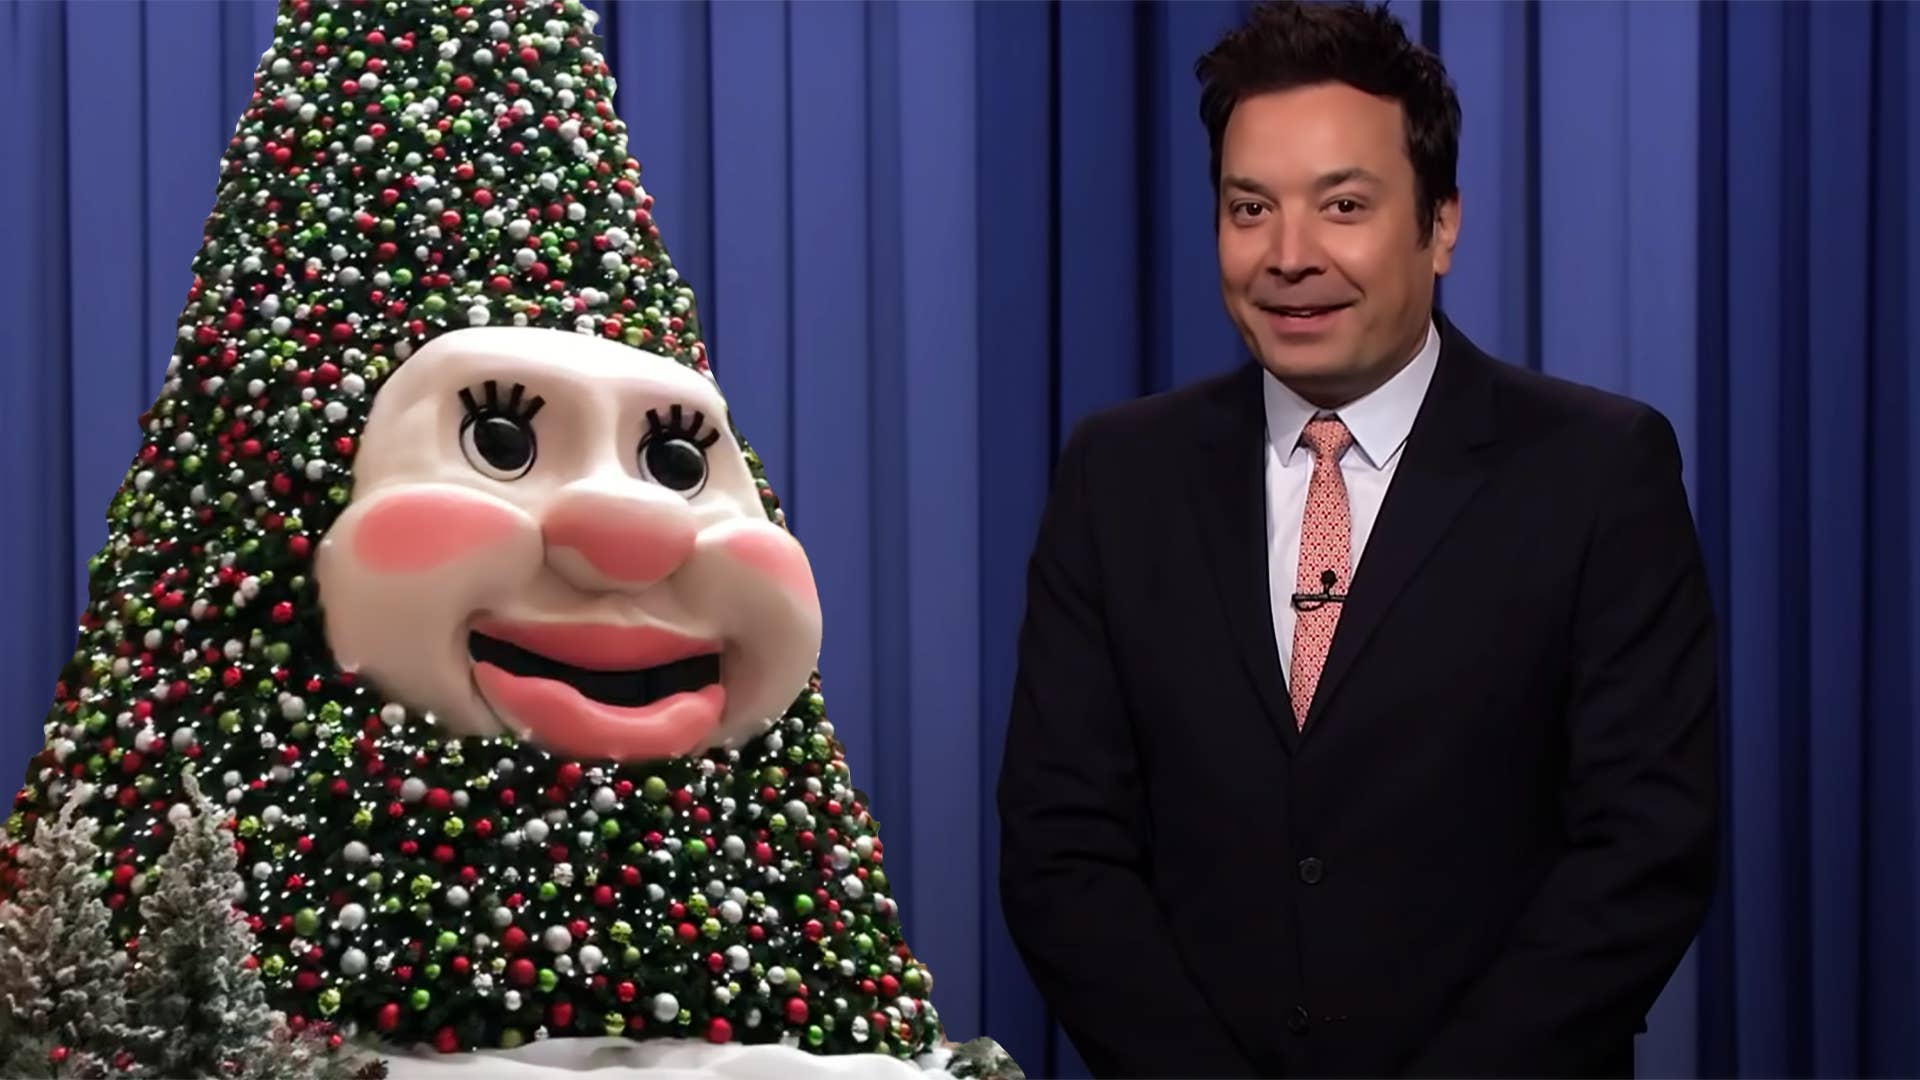 Jimmy Fallon discussing Woody the Christmas Tree on The Tonight Show.